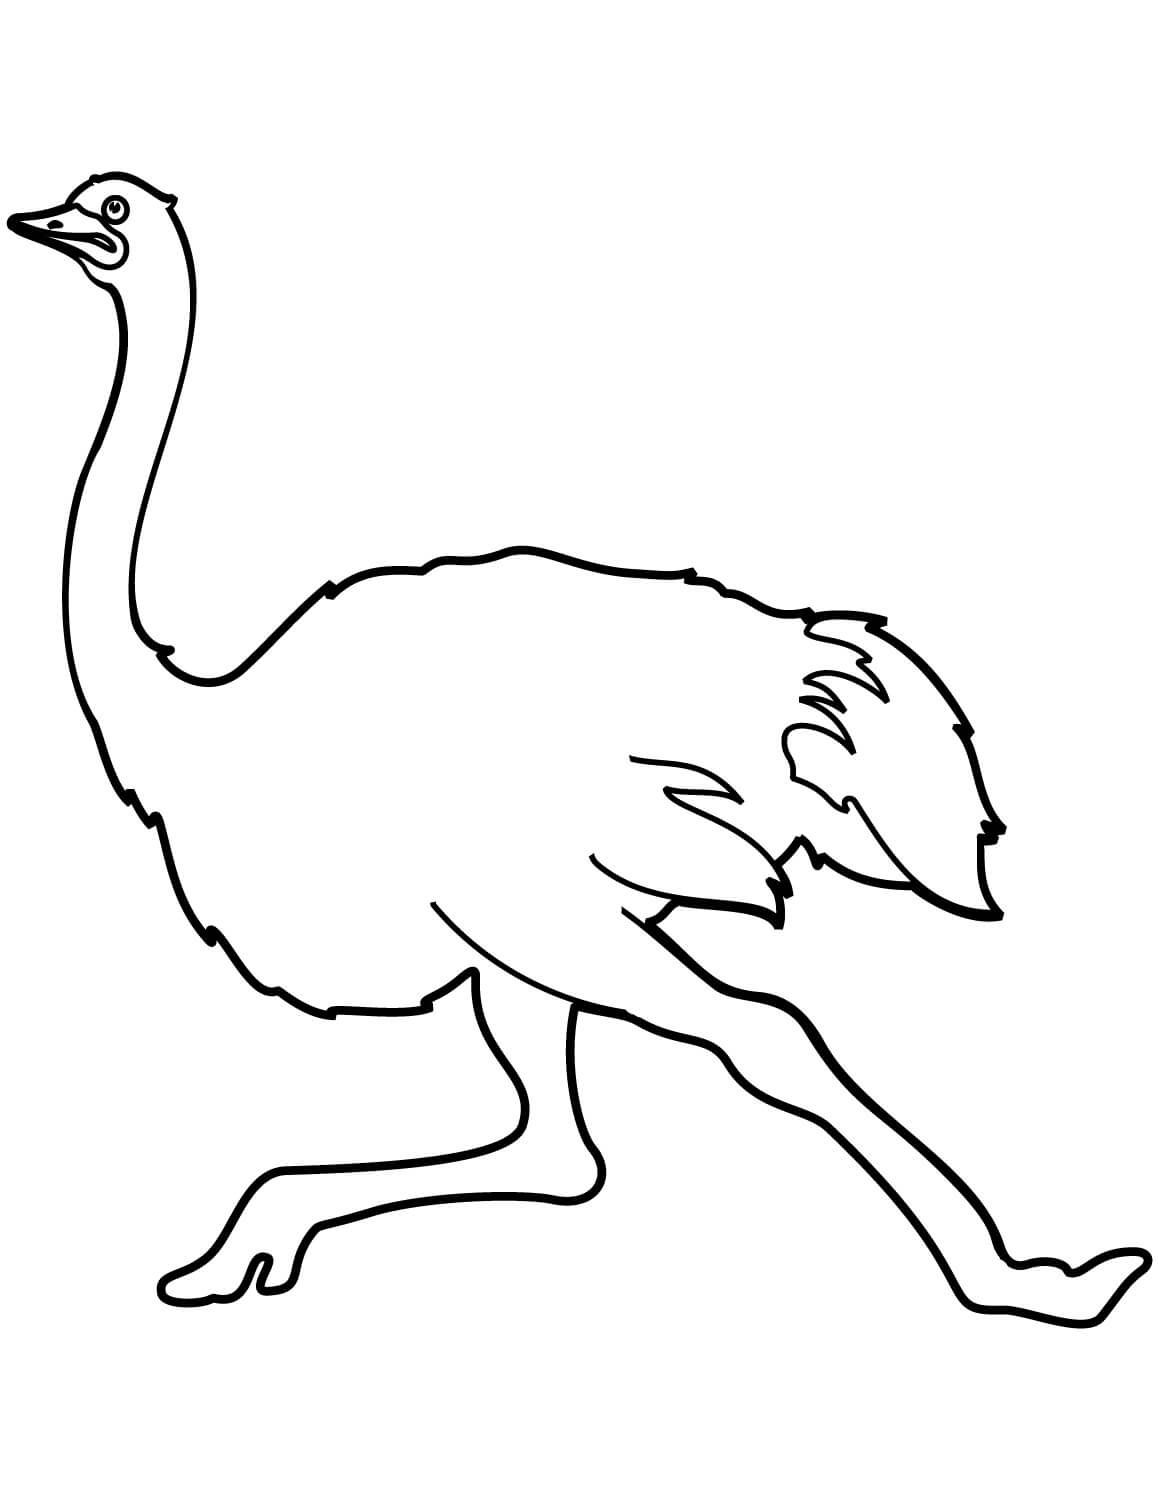 Running Ostrich Coloring Page